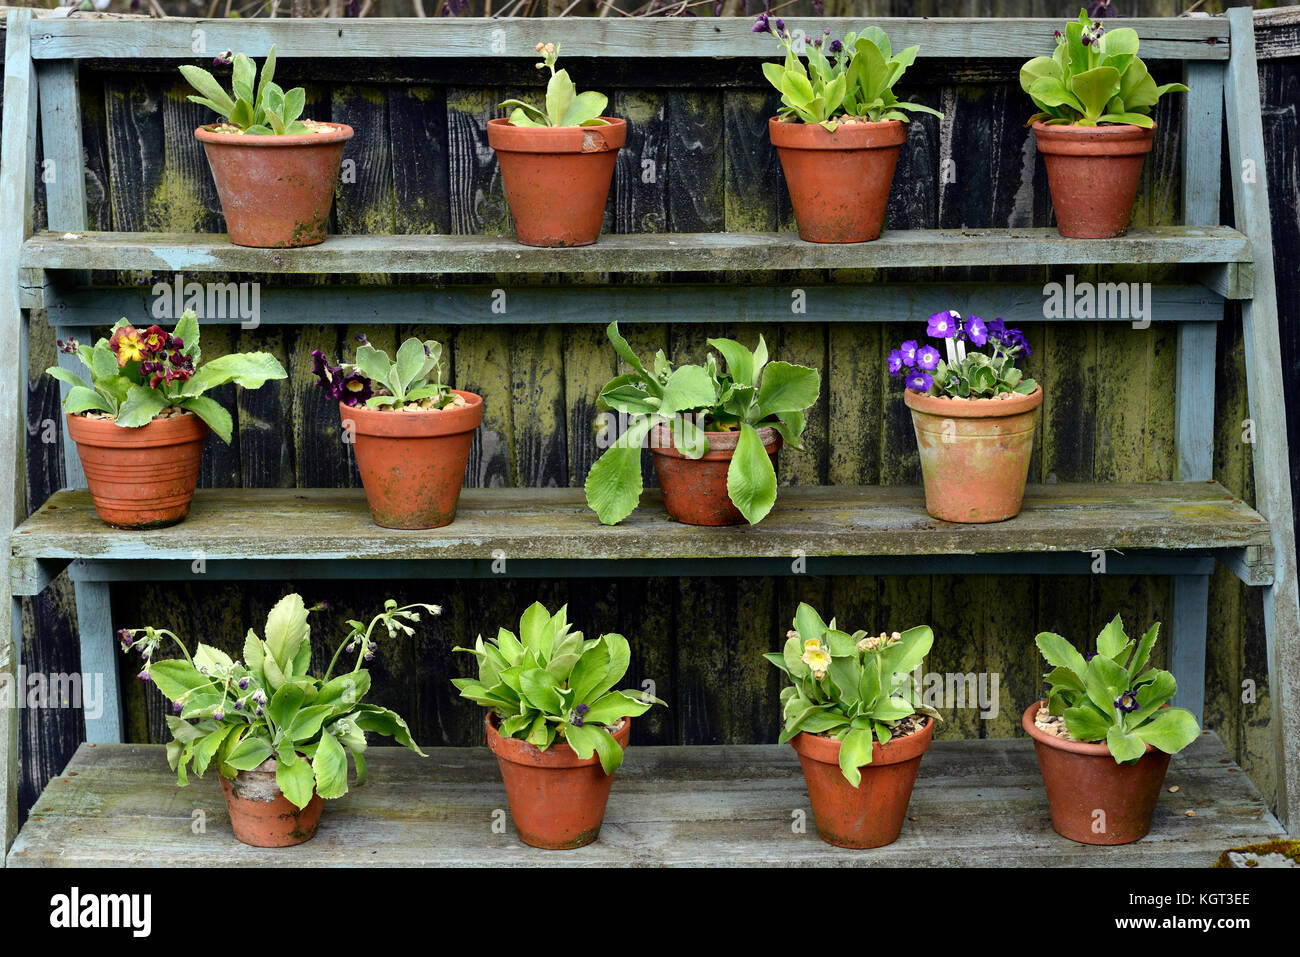 primula, auricula, theatre, display, displays, arrangement, arranged, show,flowering plants in pots, flowers, spring, RM Floral Stock Photo